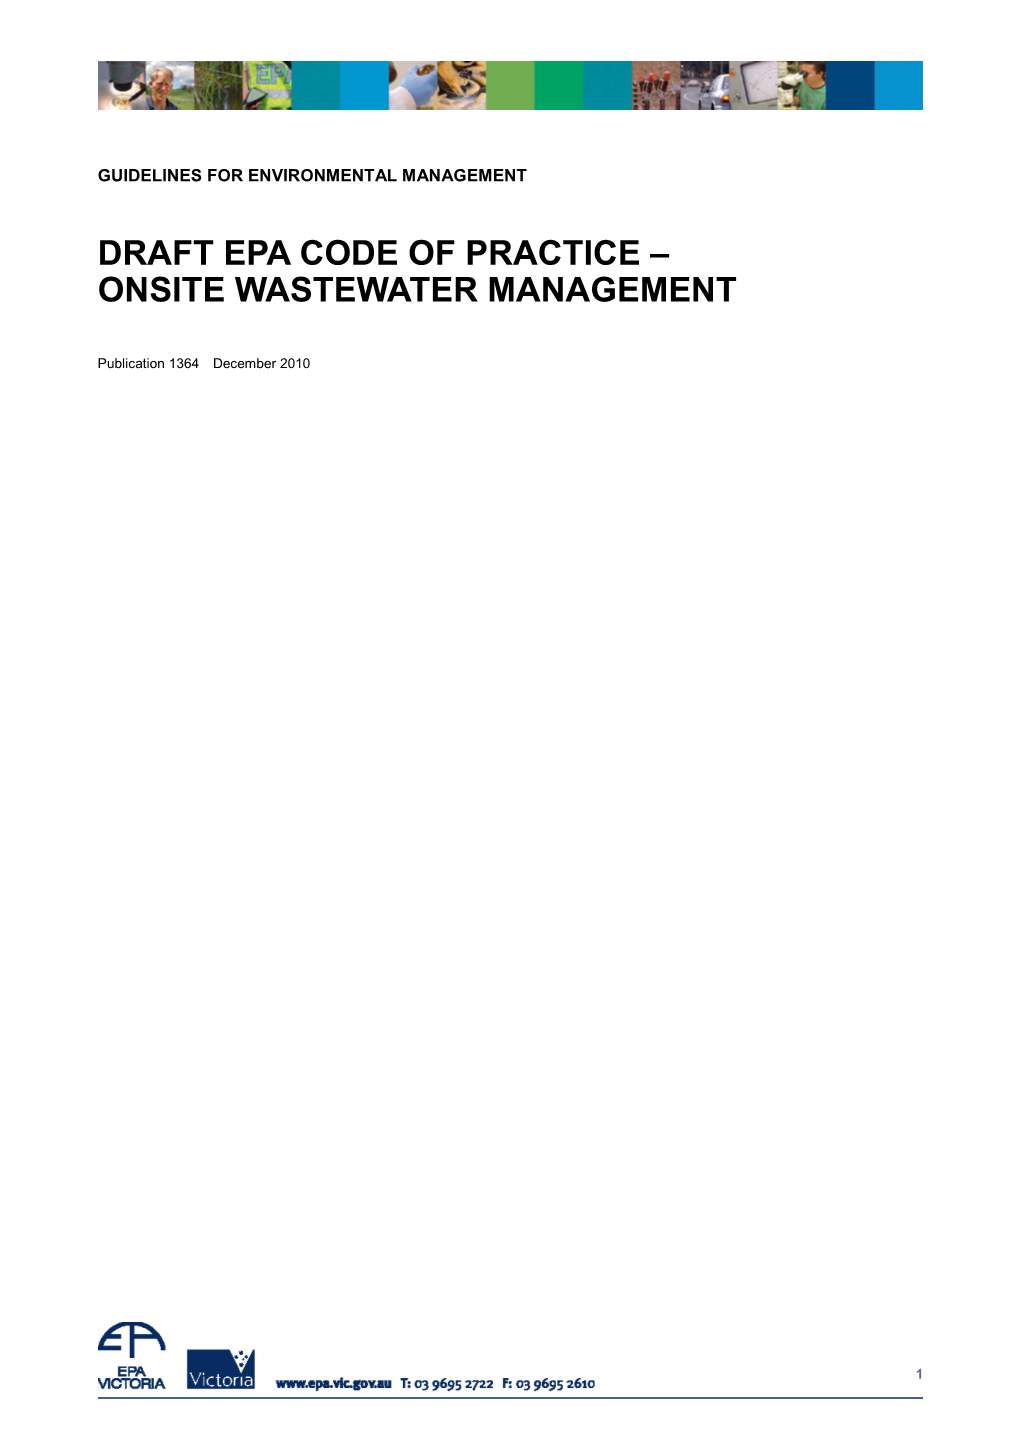 Draft Epa Code of Practice – Onsite Wastewater Management